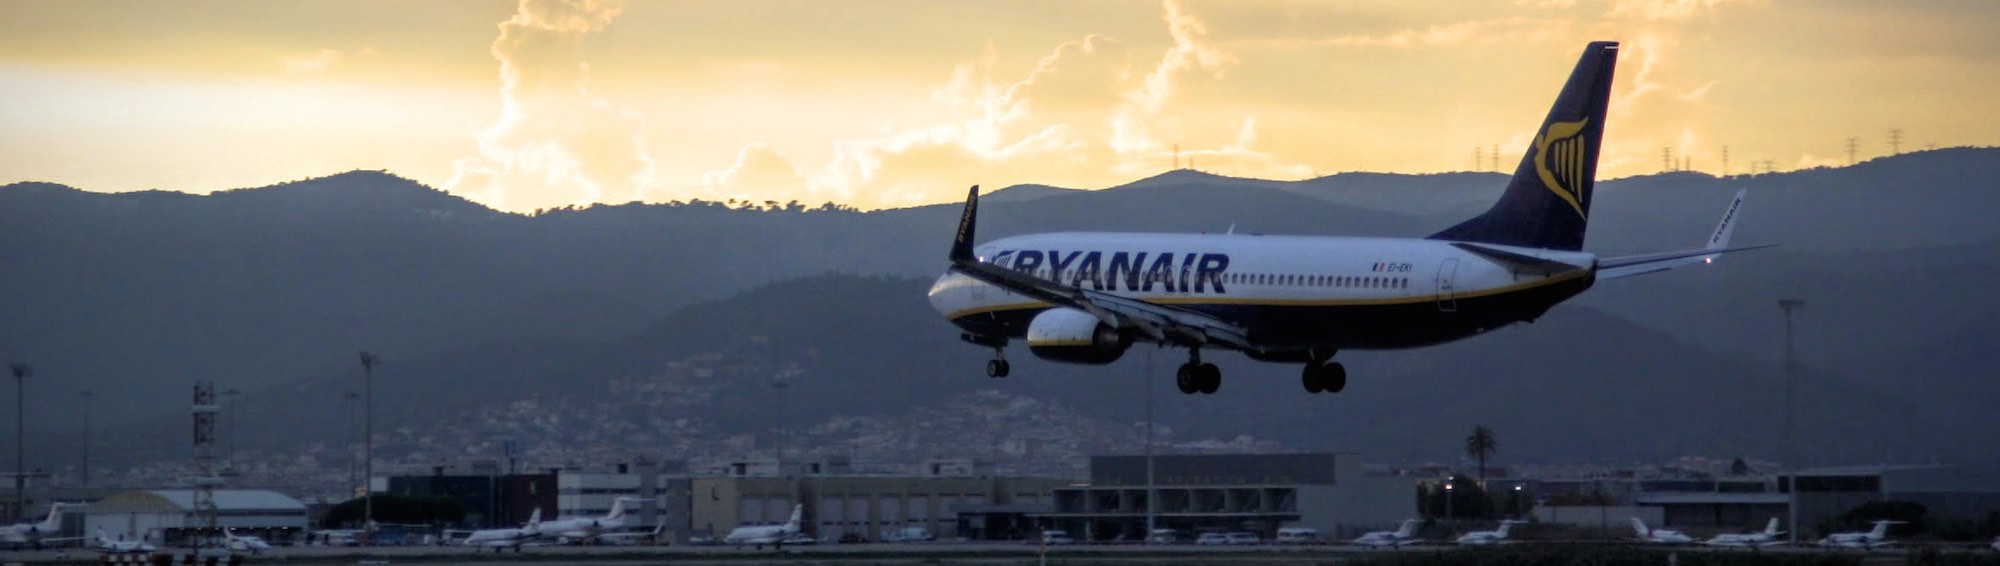 Best time to book flights for Gerona (GRO) to Dublin (DUB) flights with Ryanair at AirHint